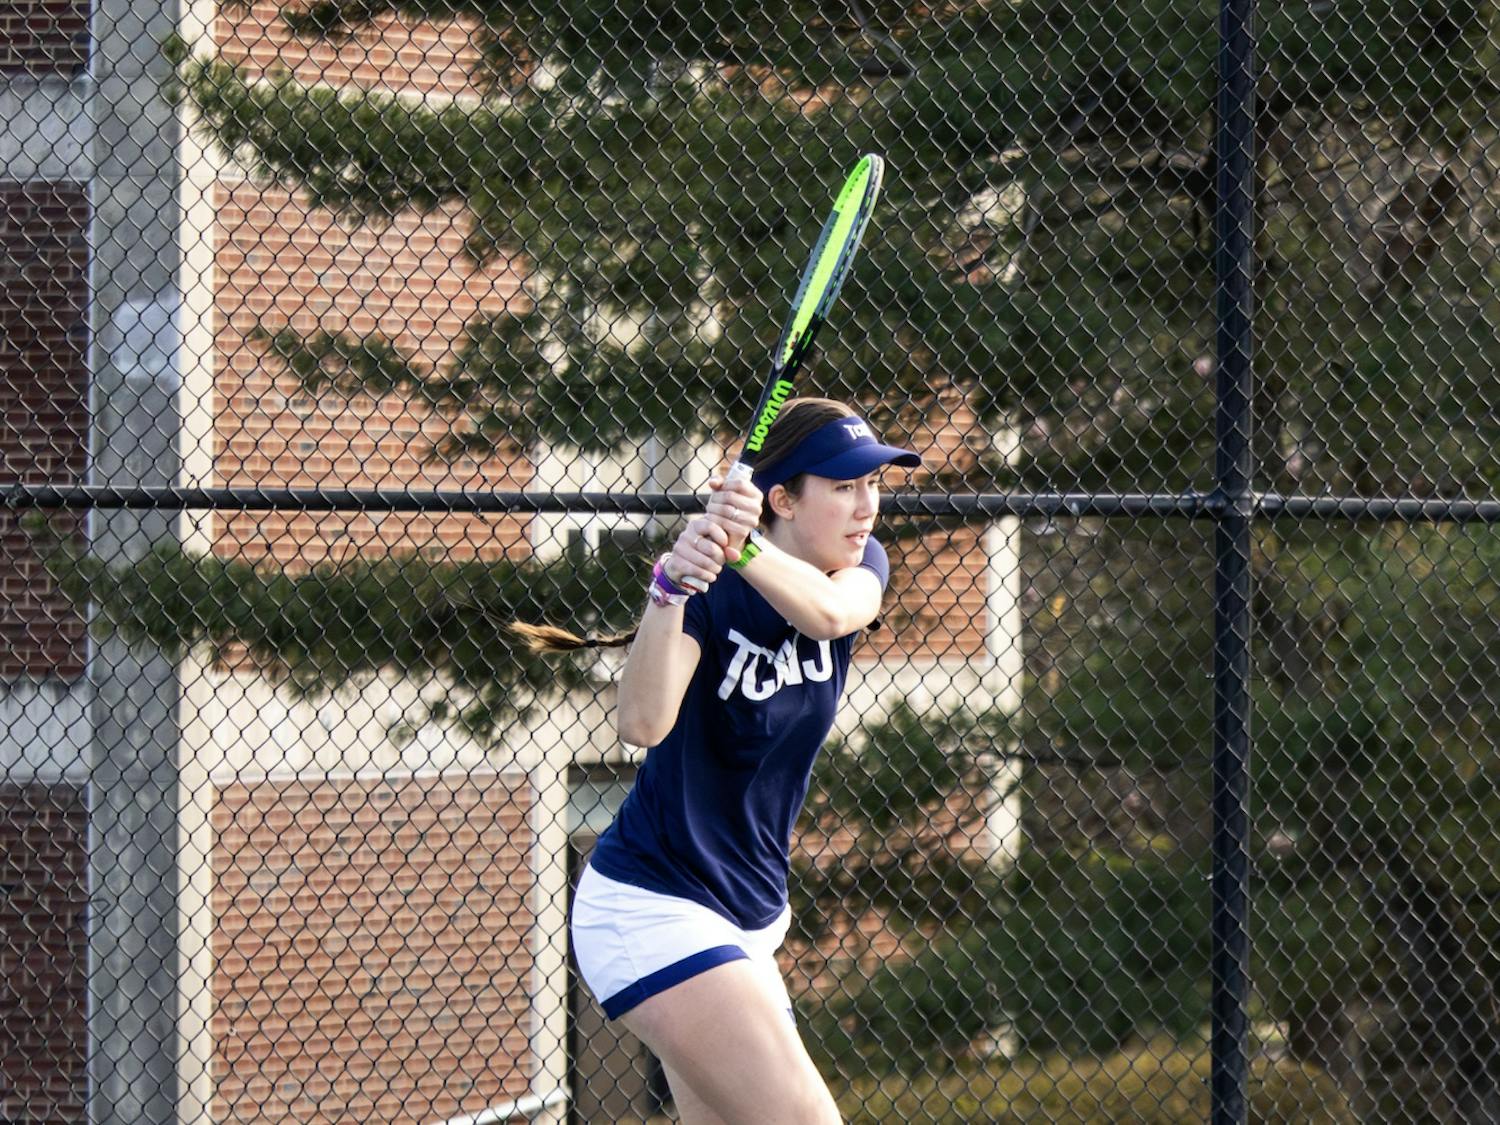 Freshman Zoey Albert in one of her matches (Photo courtesy of Brielle Zemer / Staff Photographer).